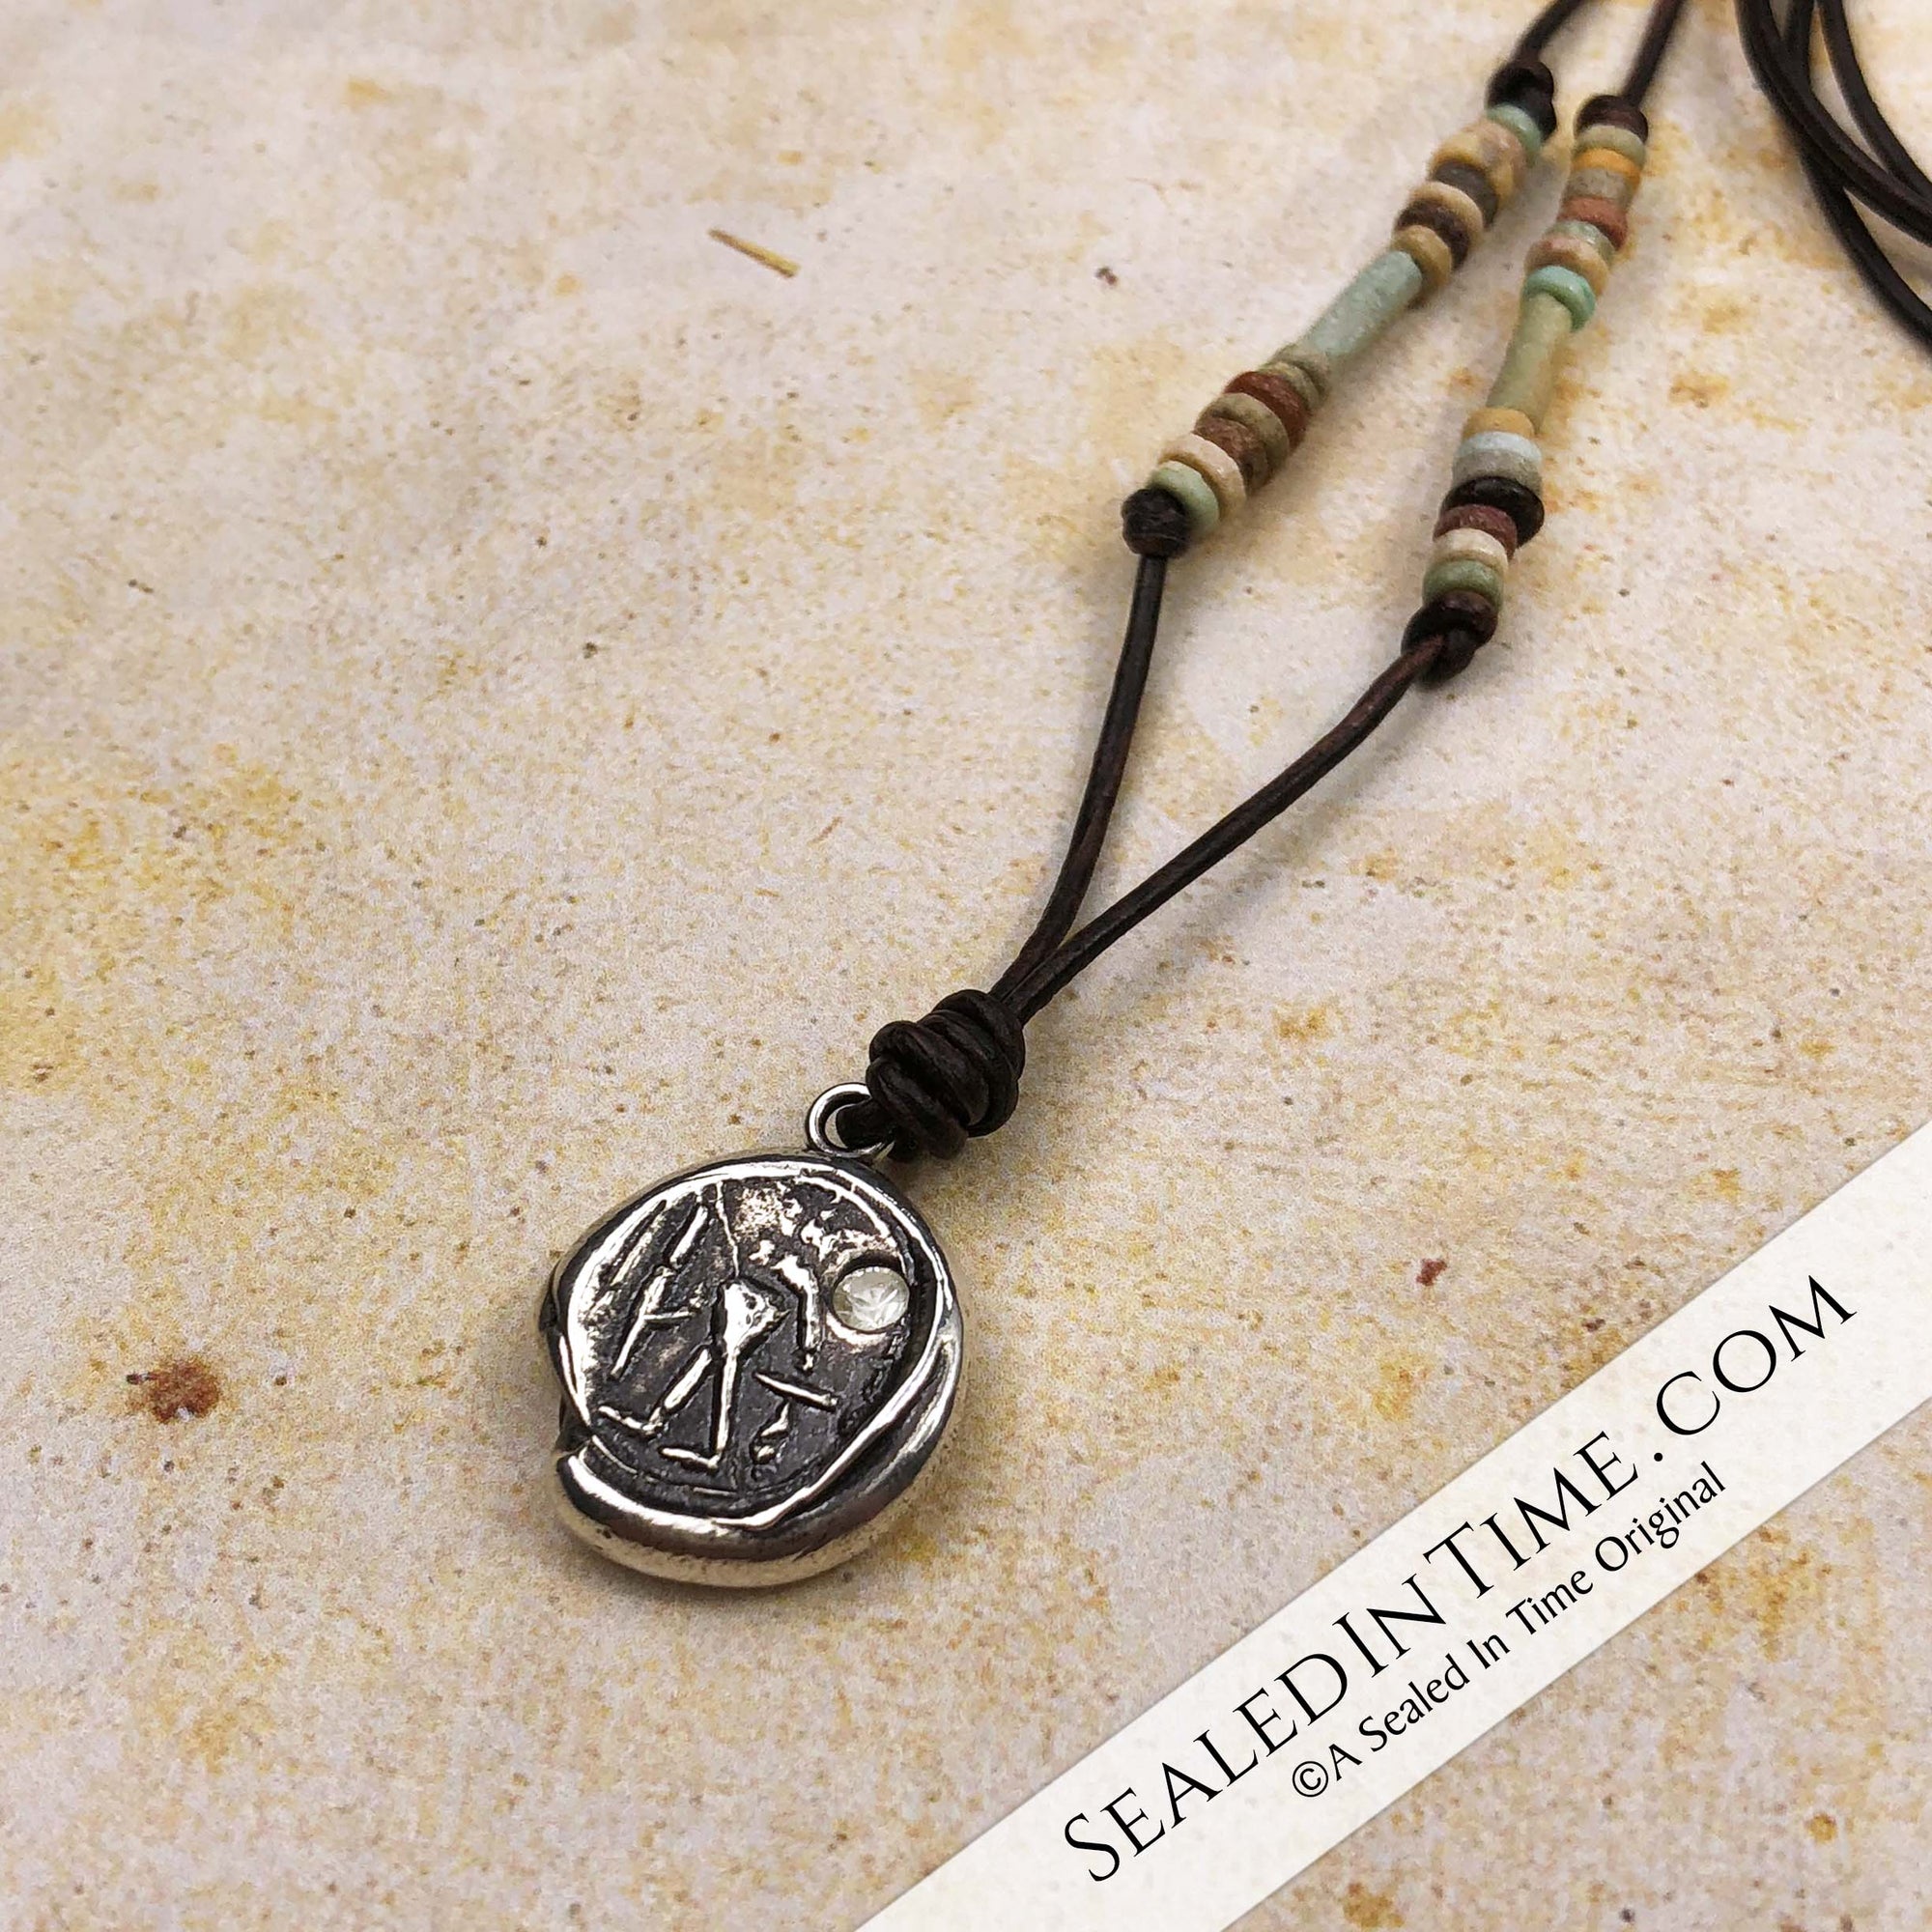 Limited Authentic Ancient Egyptian Mummy Bead Edition Ancient Egyptian Anubis Wax Seal Pendant Seal Date Origin 1500 Bc Egypt Artifact - 